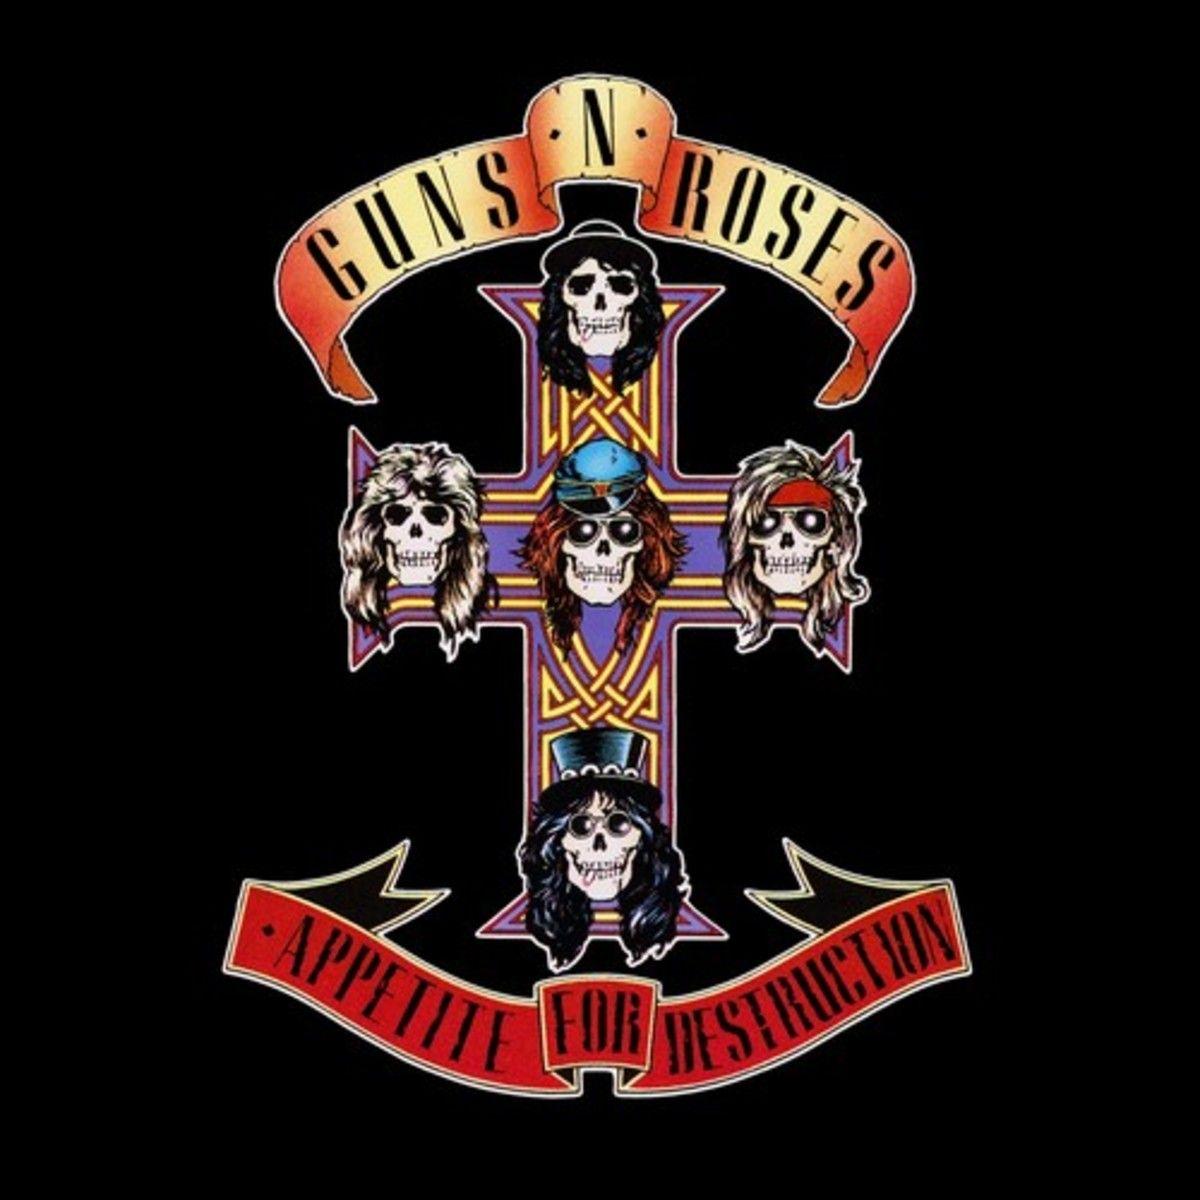 Best Rock Band Logo - Guns N' Roses: The Greatest Rock Band Of All Time - Sabotage Times